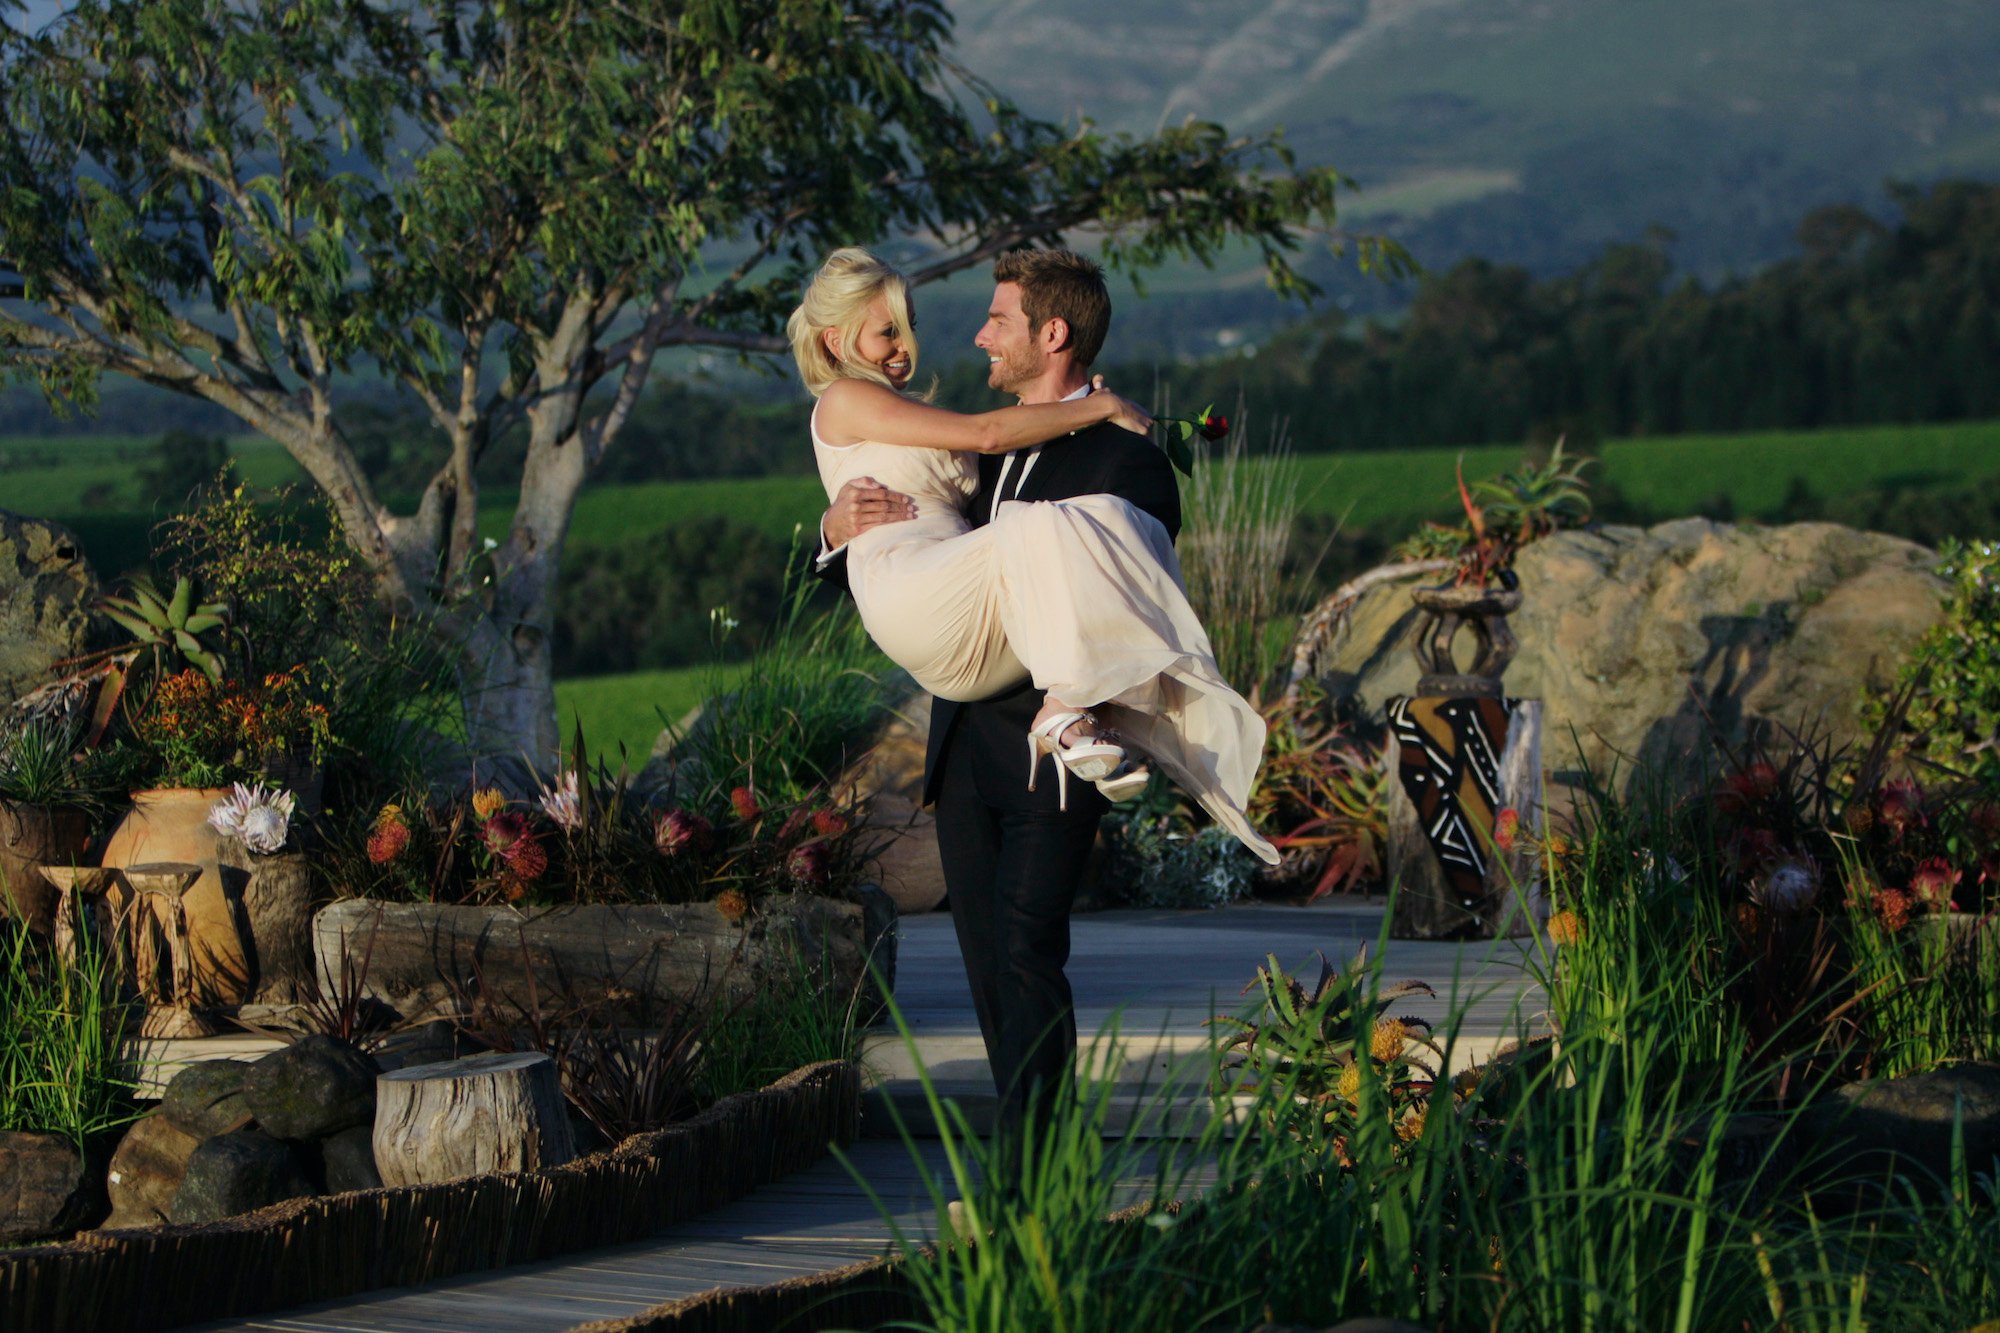 The most shocking Bachelor and Bachelorette episodes includes bachelor Brad Womack, pictured here carrying Emily Maynard